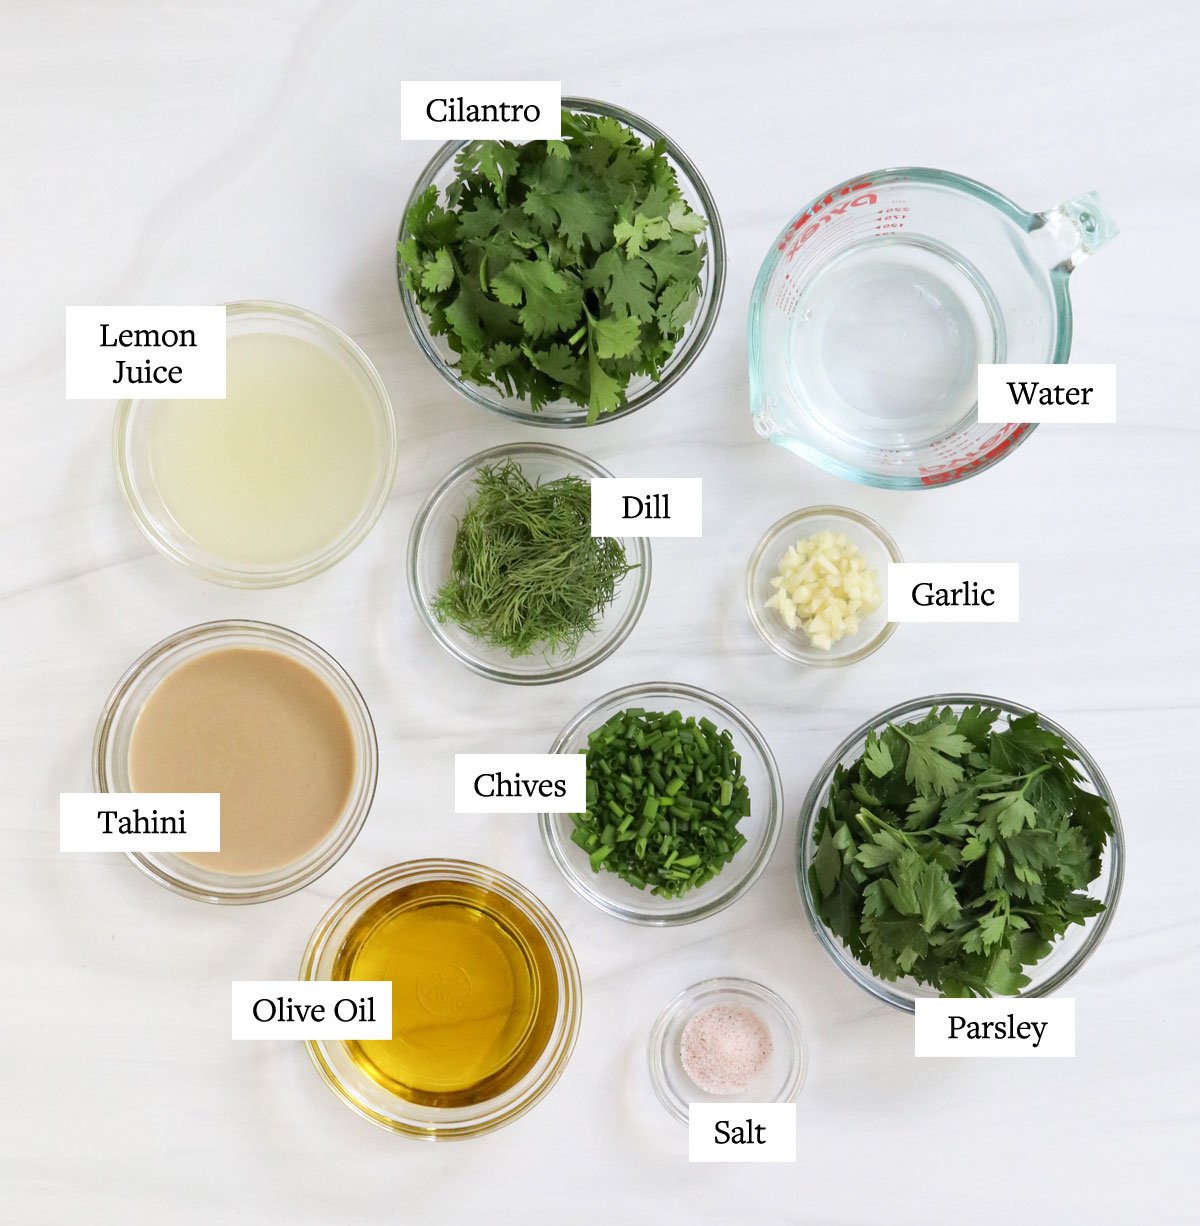 green goddess dressing ingredients labeled in glass bowls.